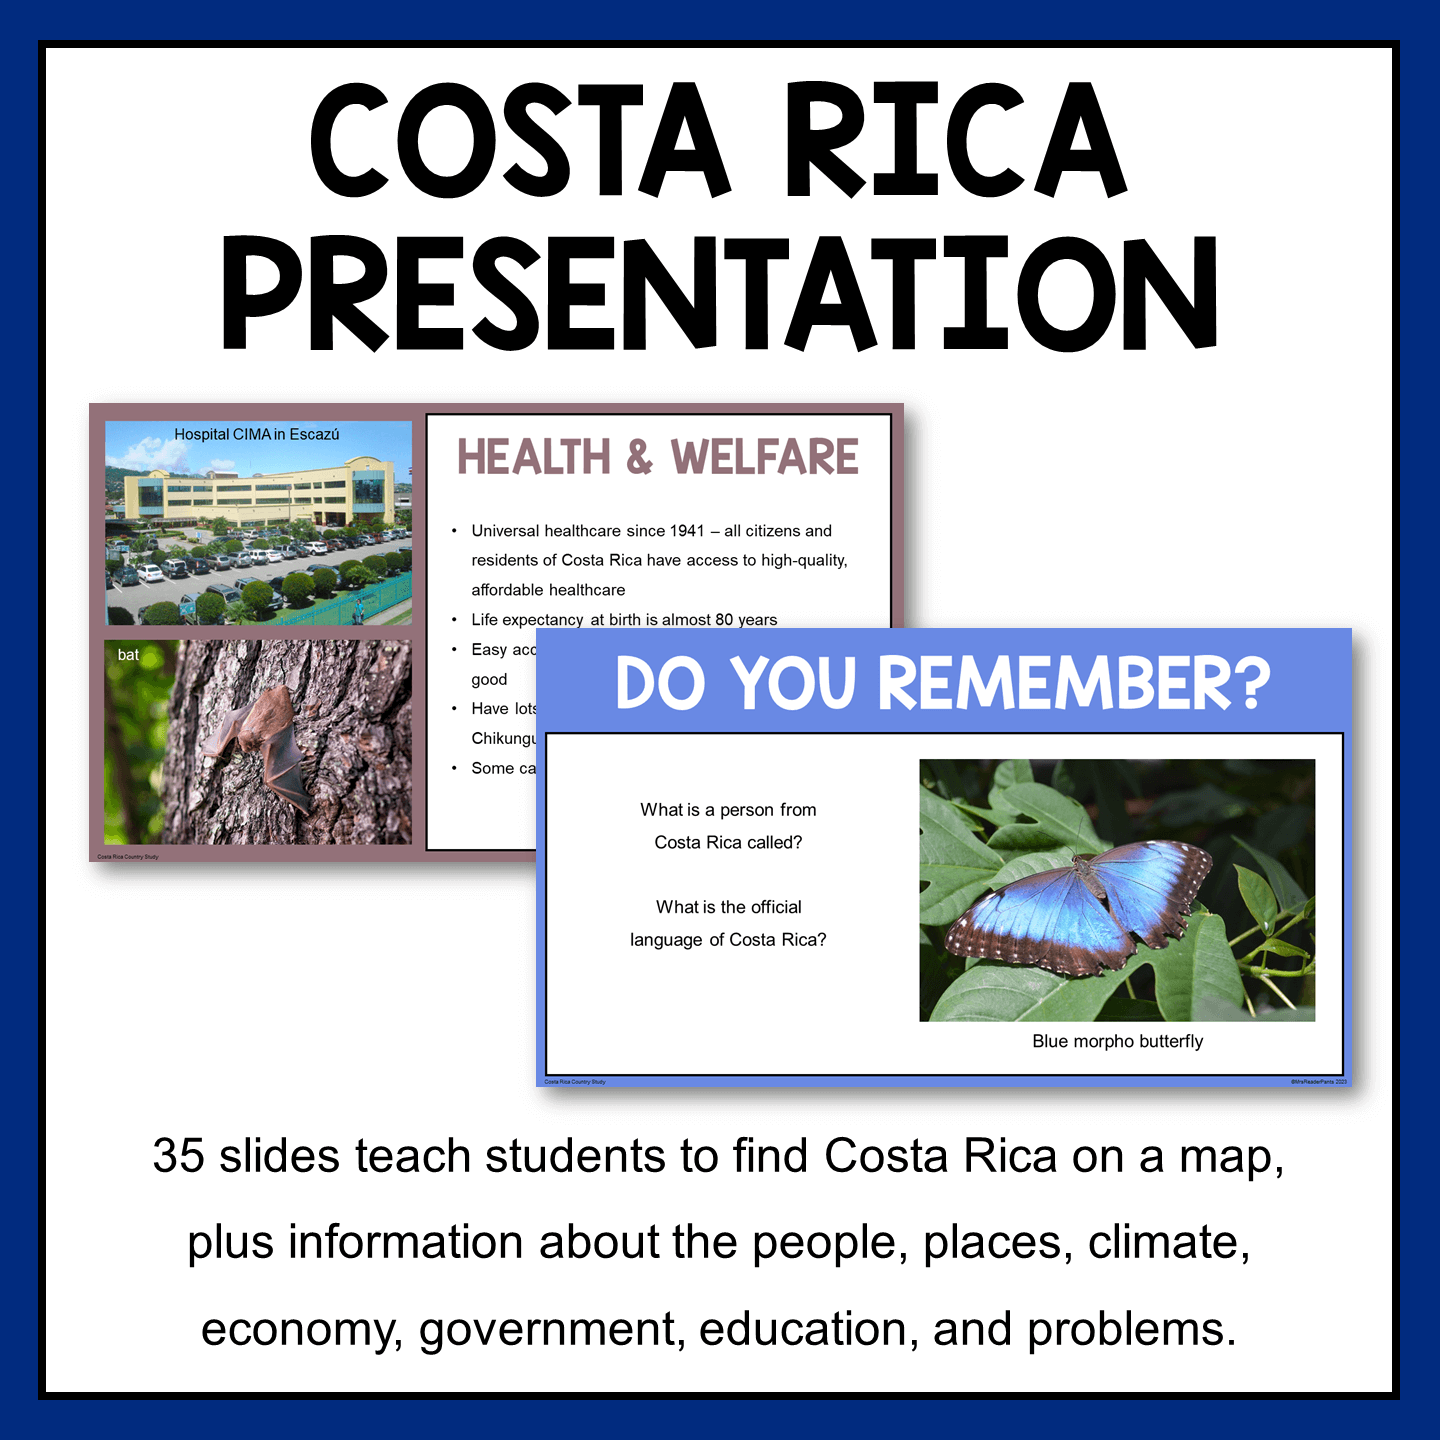 This Costa Rica Country Study includes a 35-slide presentation. Every slide includes well-spaced text and either a photo or a map of Costa Rica.